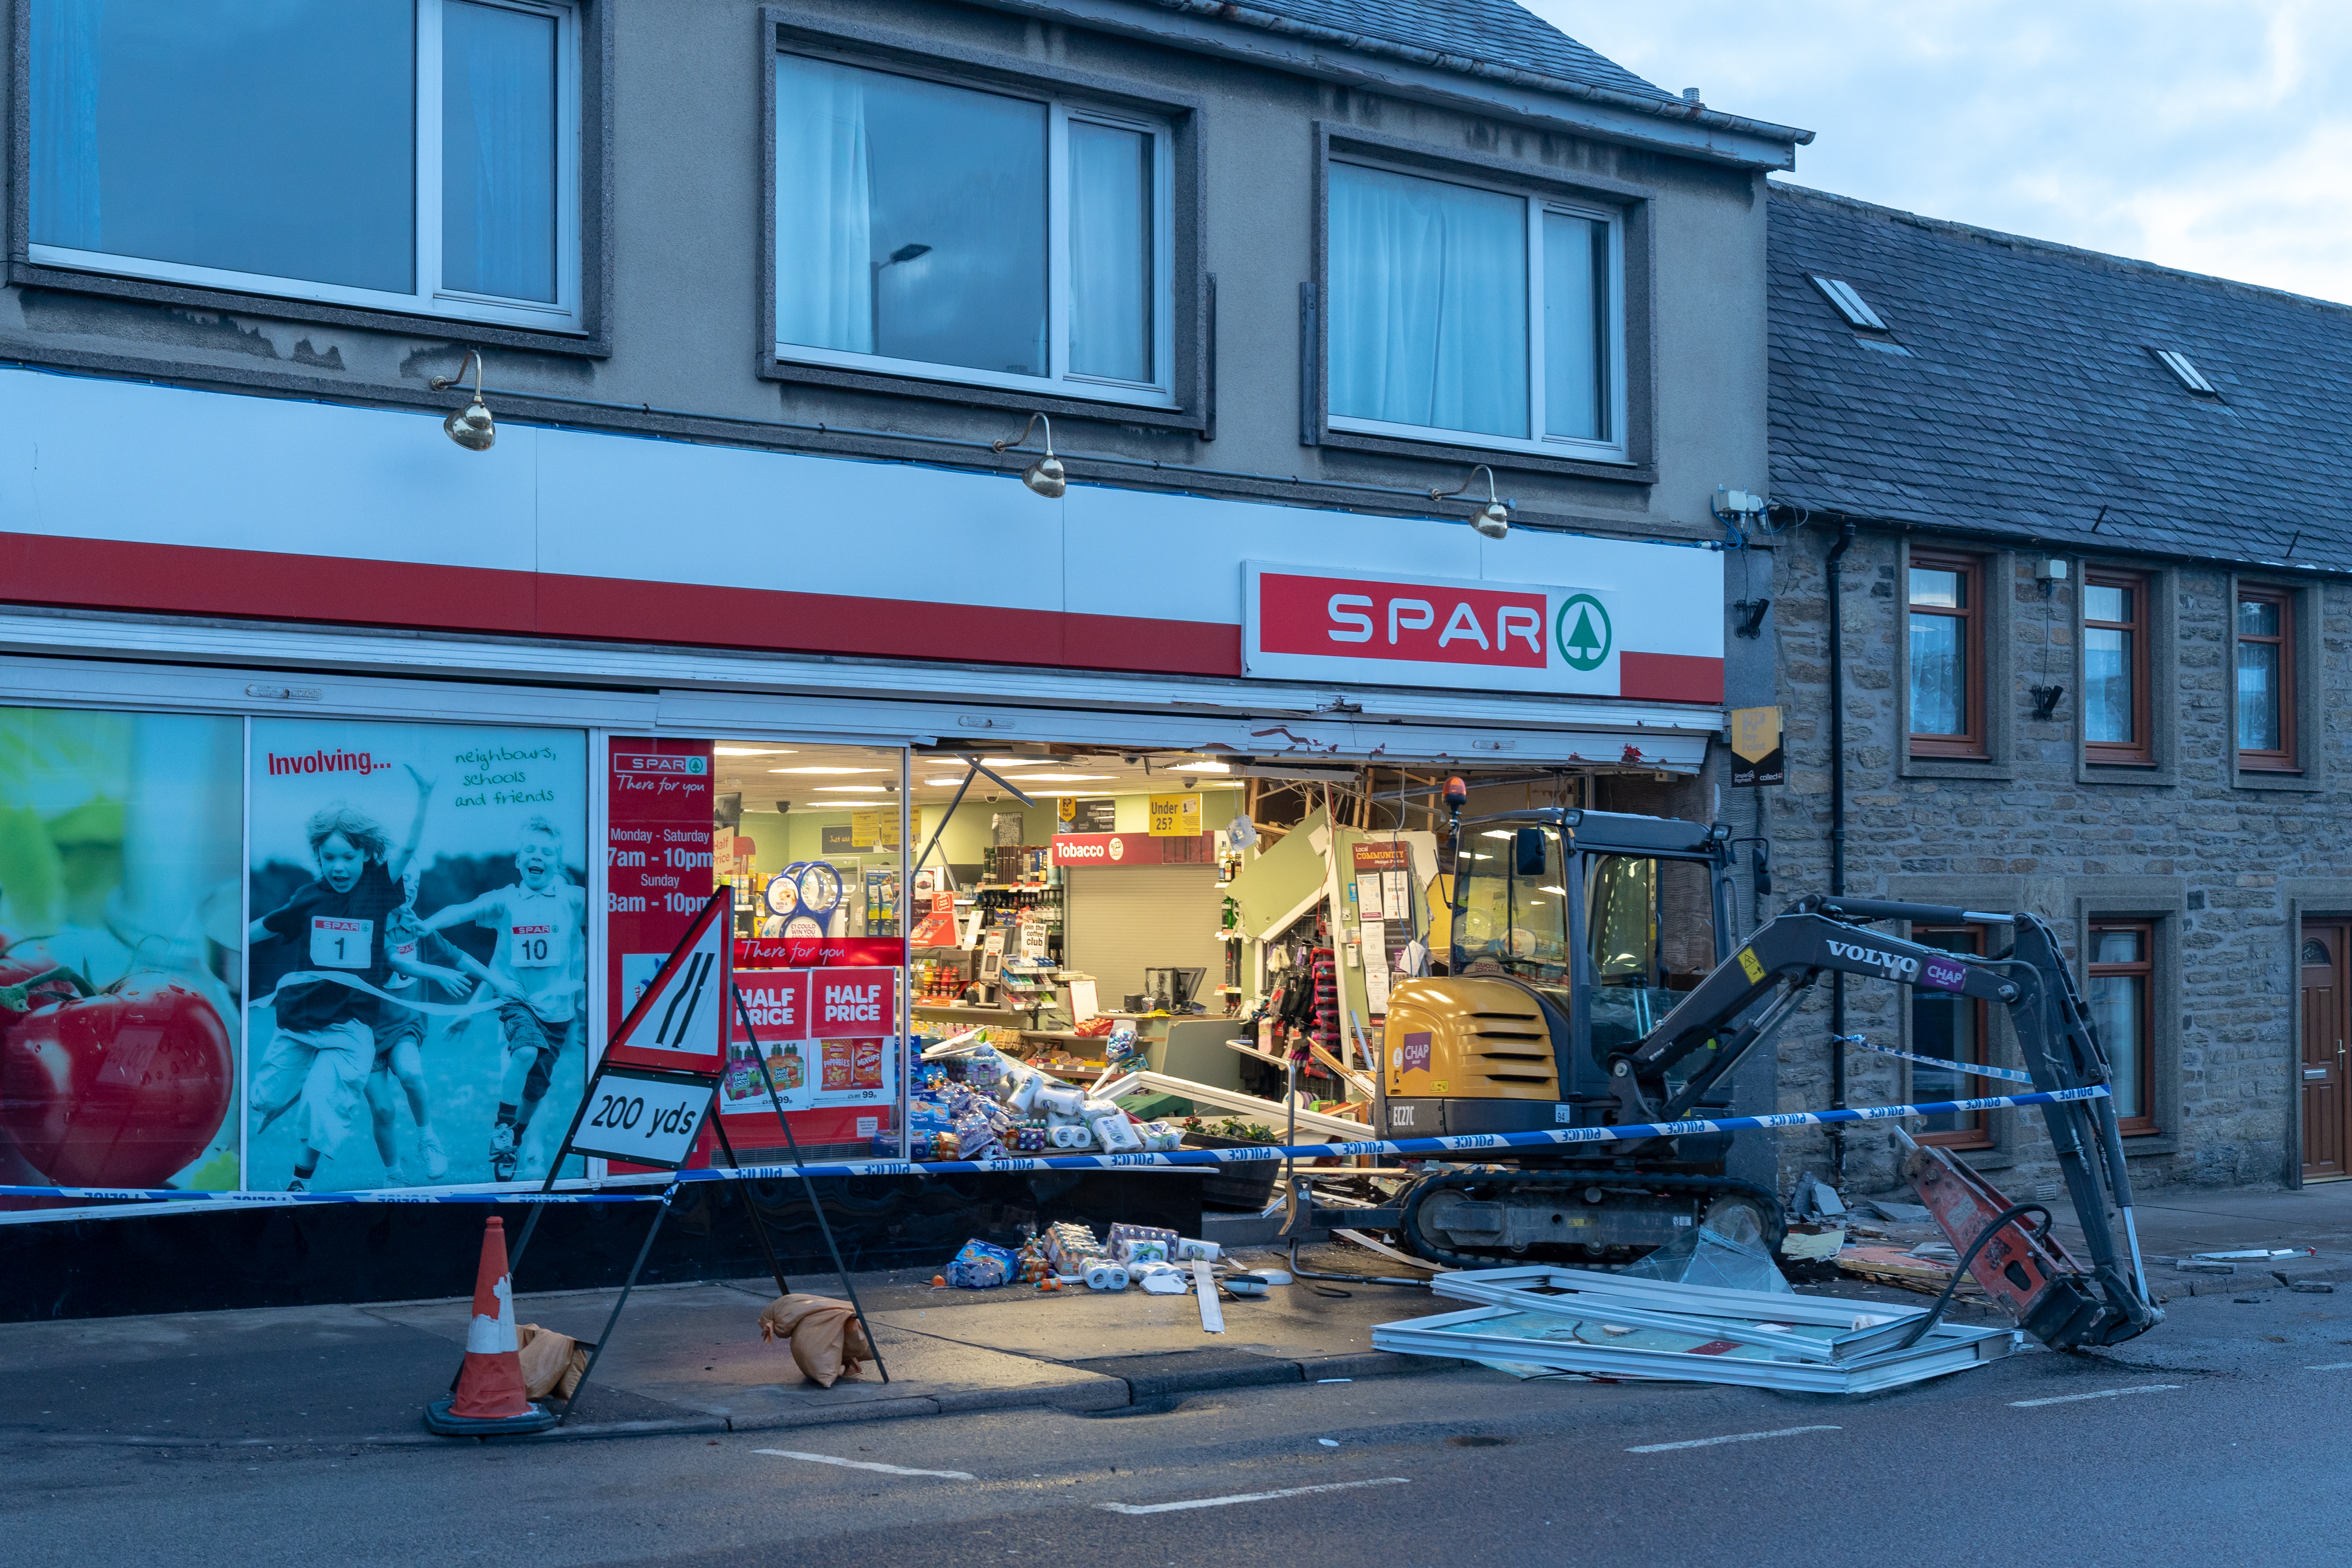 A digger was rammed into the Spar premises in Regent Street, Keith.